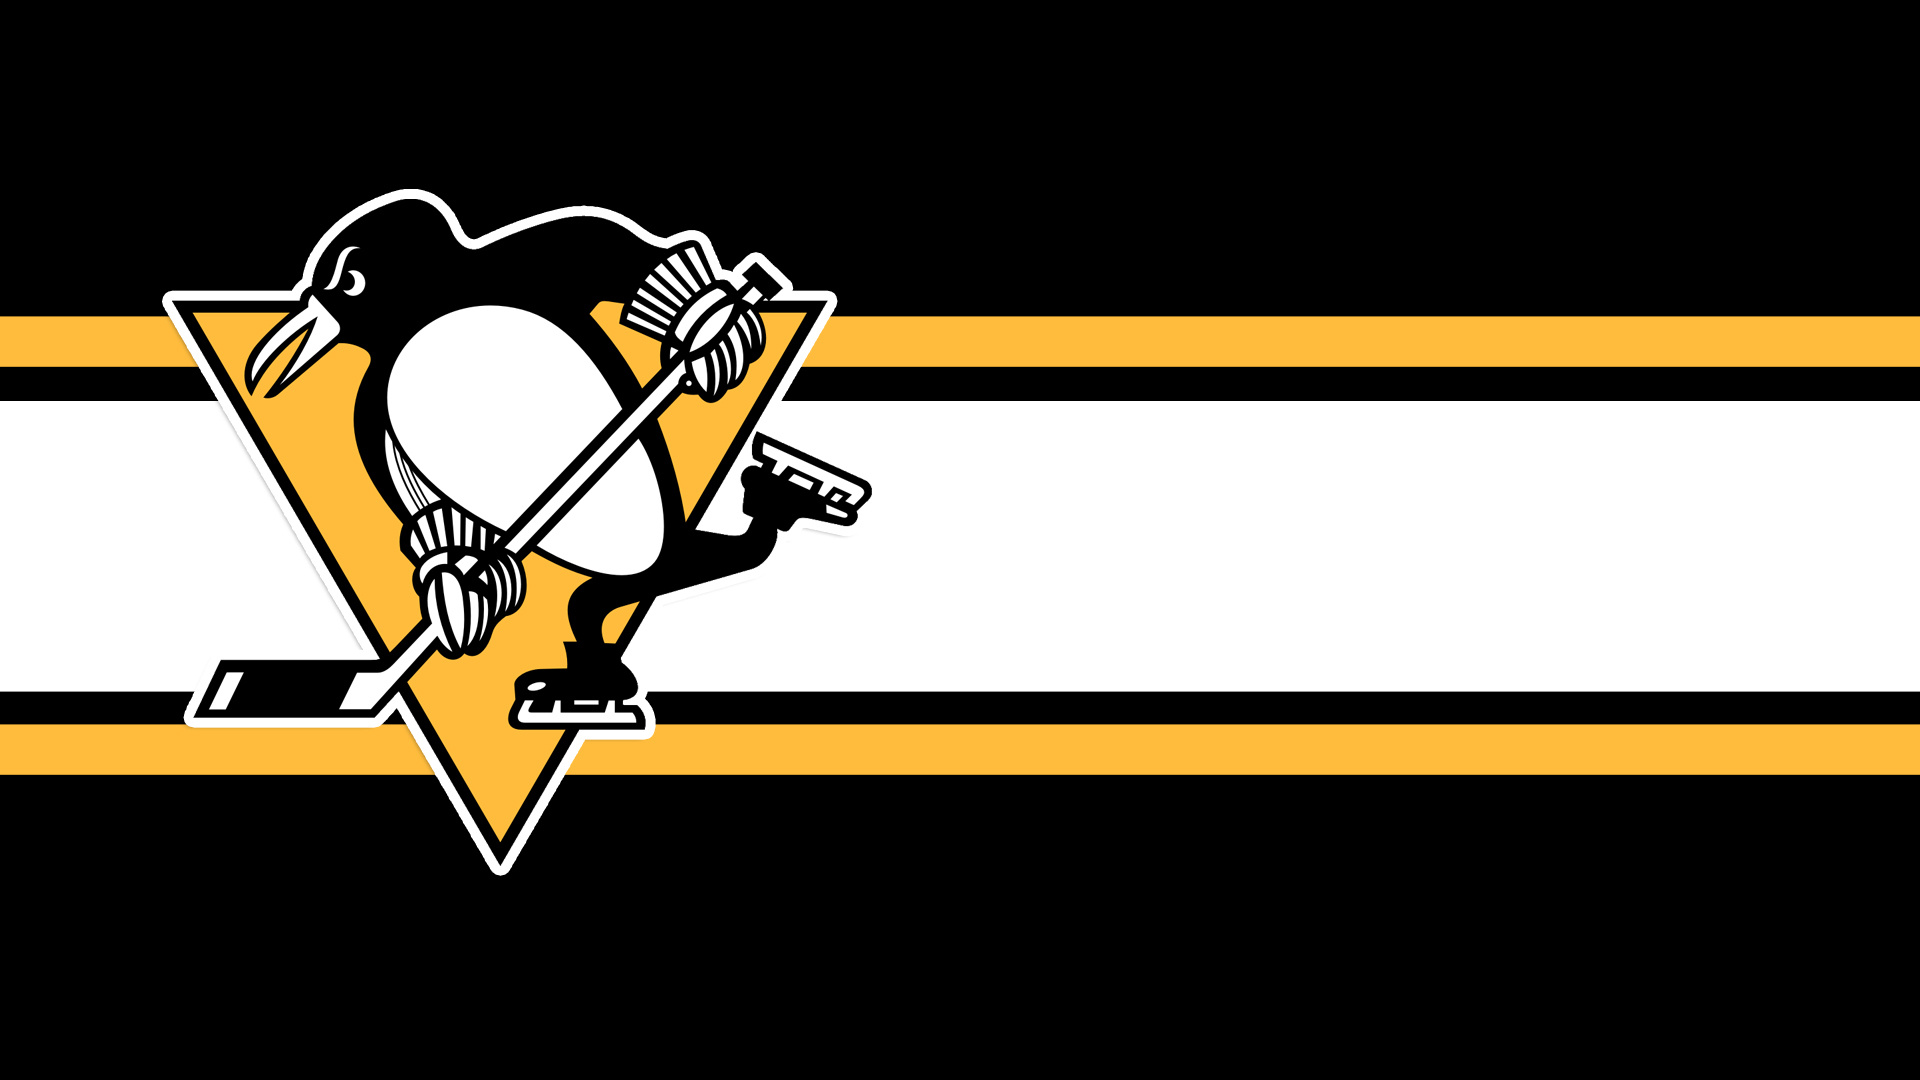 Pittsburgh Penguins: The team was founded in 1967 as an expansion team, NHL. 1920x1080 Full HD Wallpaper.